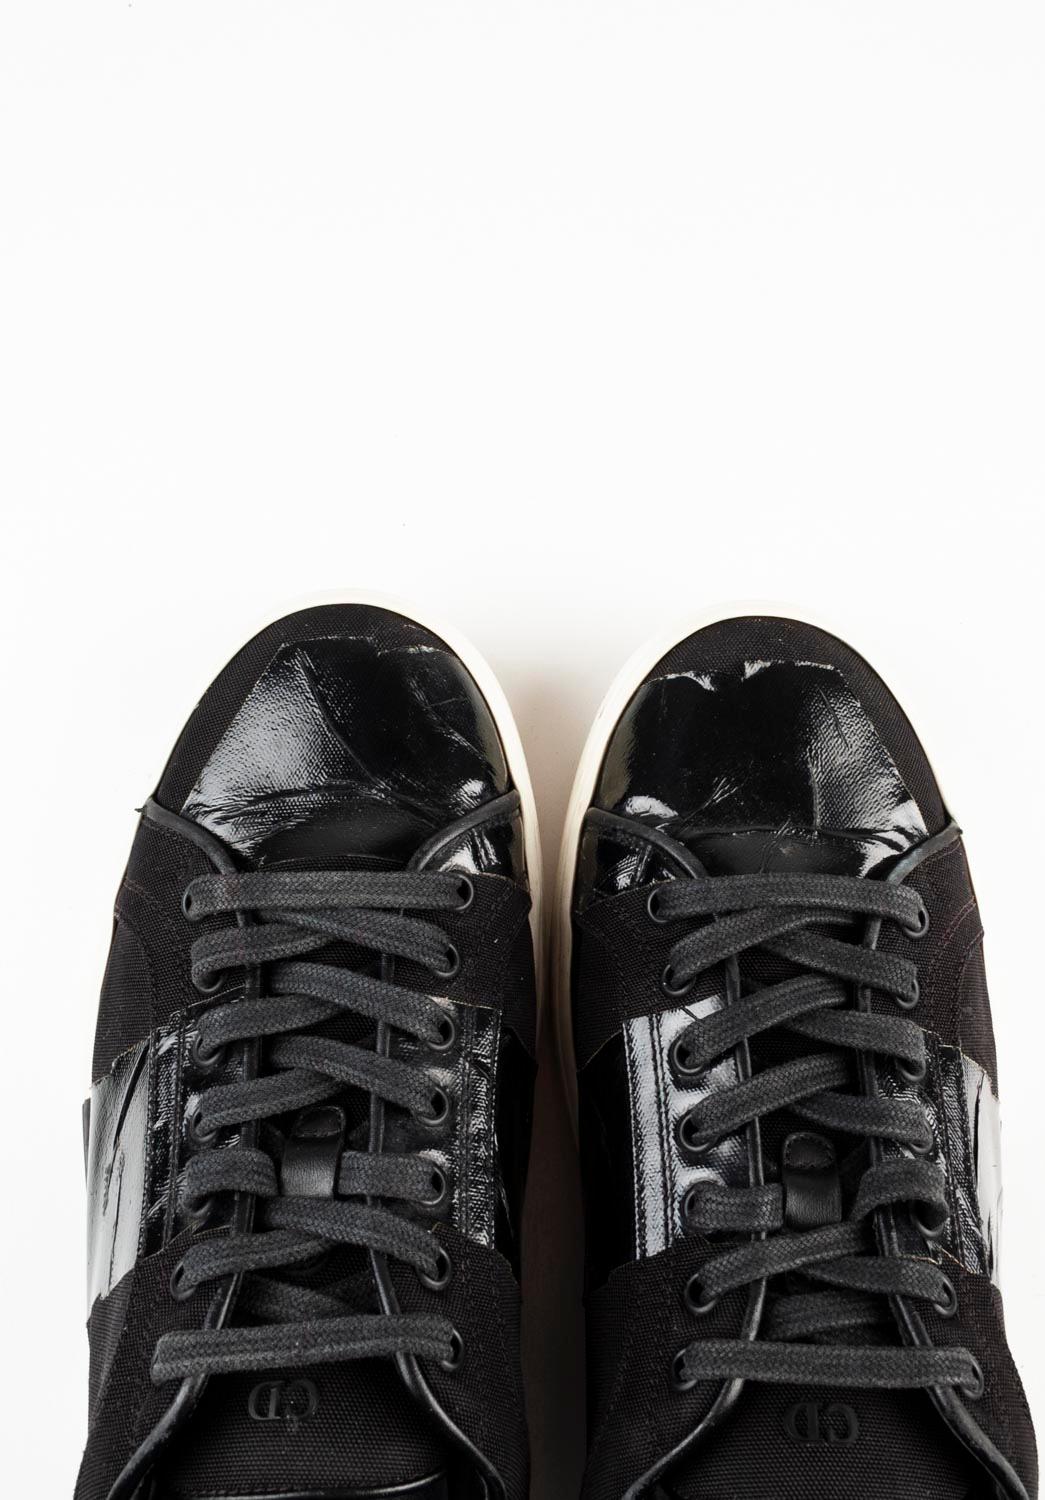 Men's Dior Homme Men Sneakers AW17 Men Shoes Size EUR41, USA 7 ½, UK 6 ½, S694 For Sale